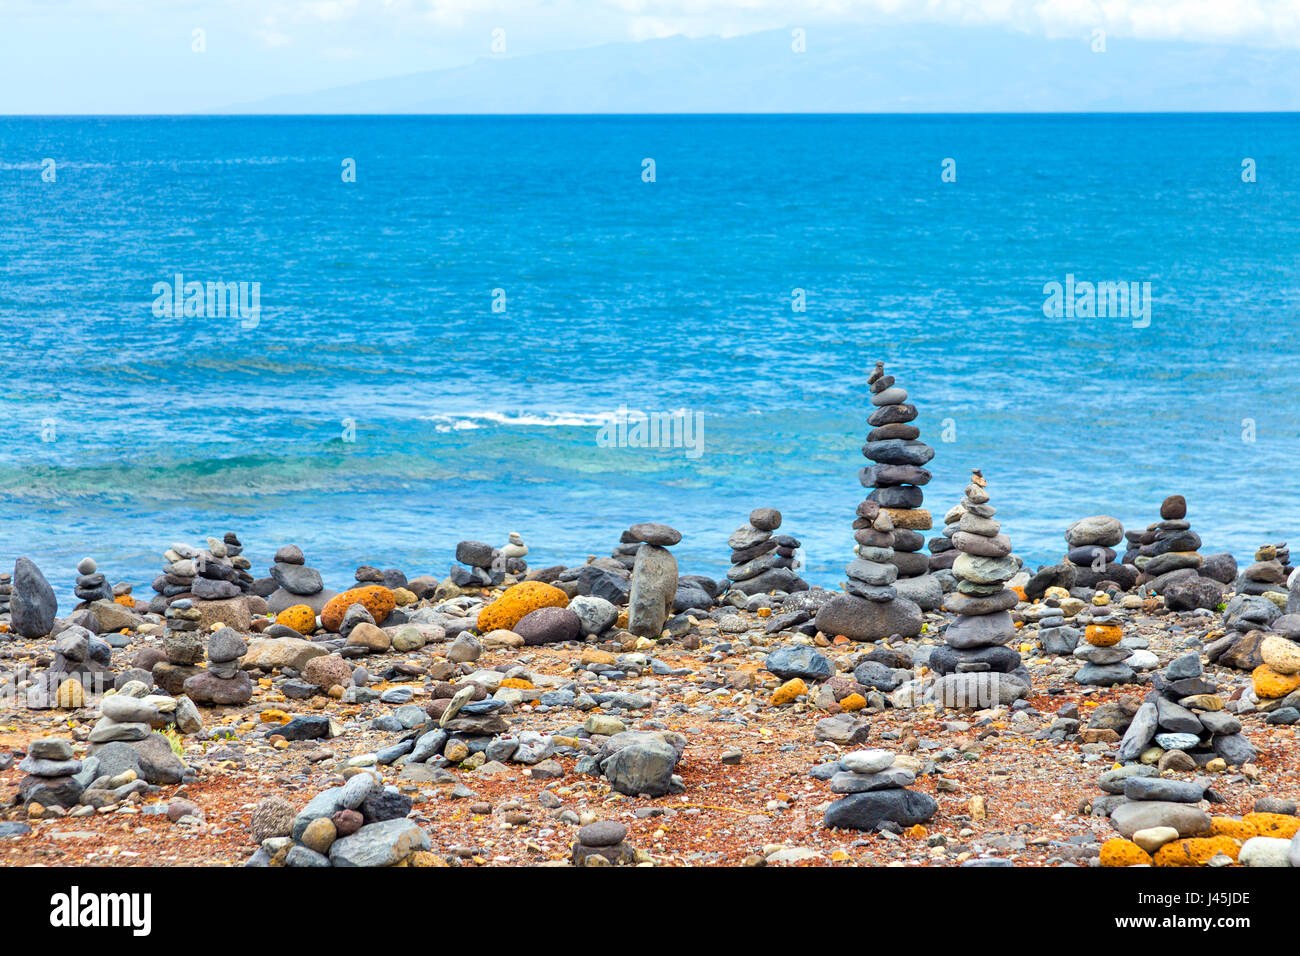 Balanced rocks on a beach with the ocean in the background in Tenerife, Spain Stock Photo